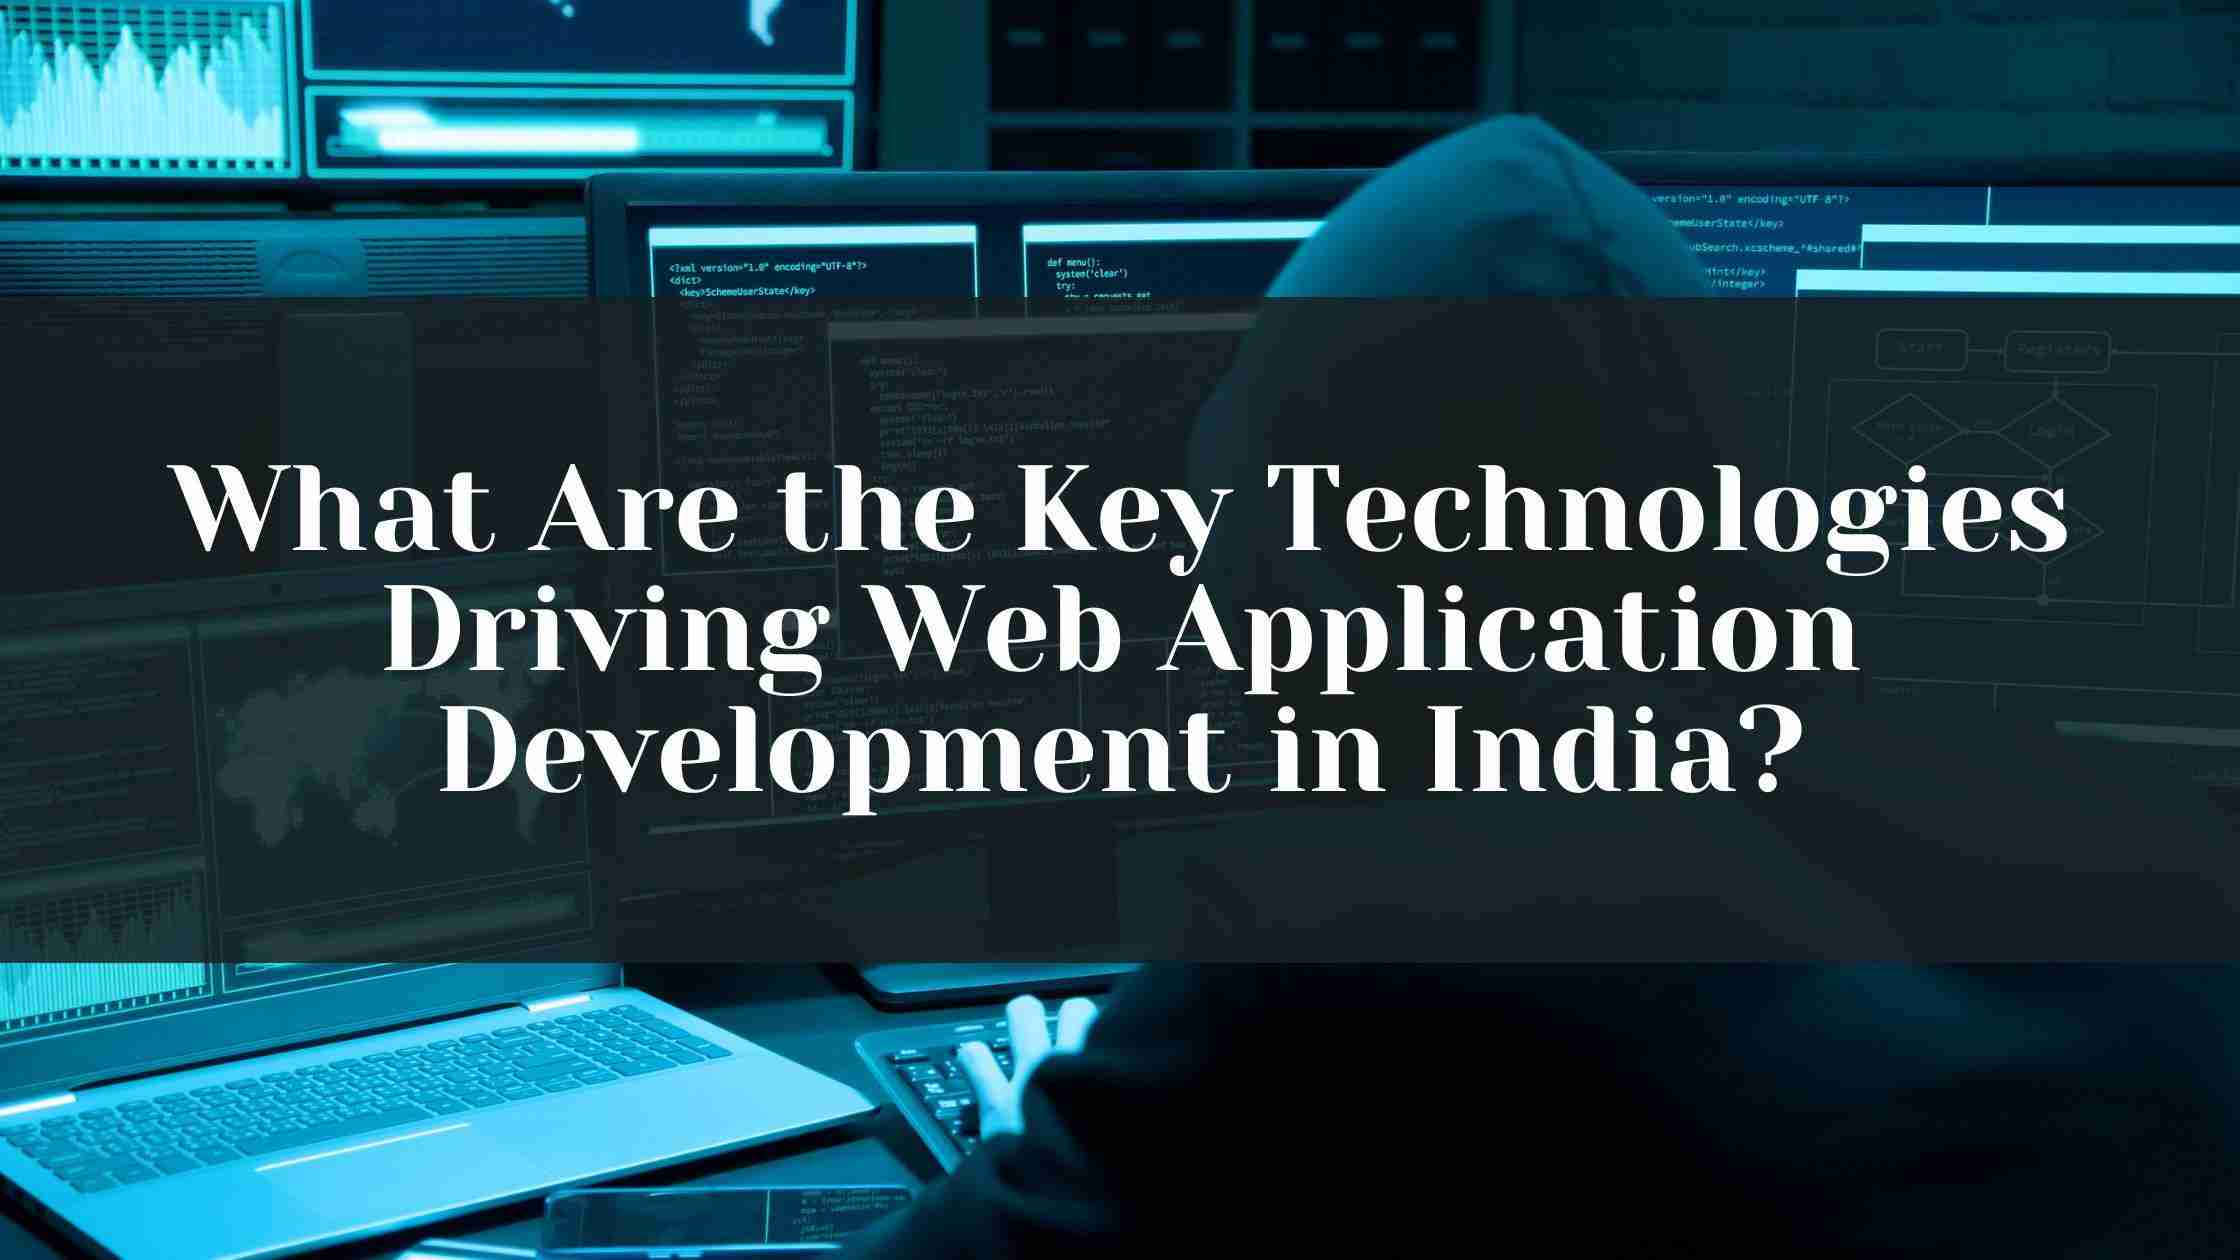 What Are the Key Technologies Driving Web Application Development in India?